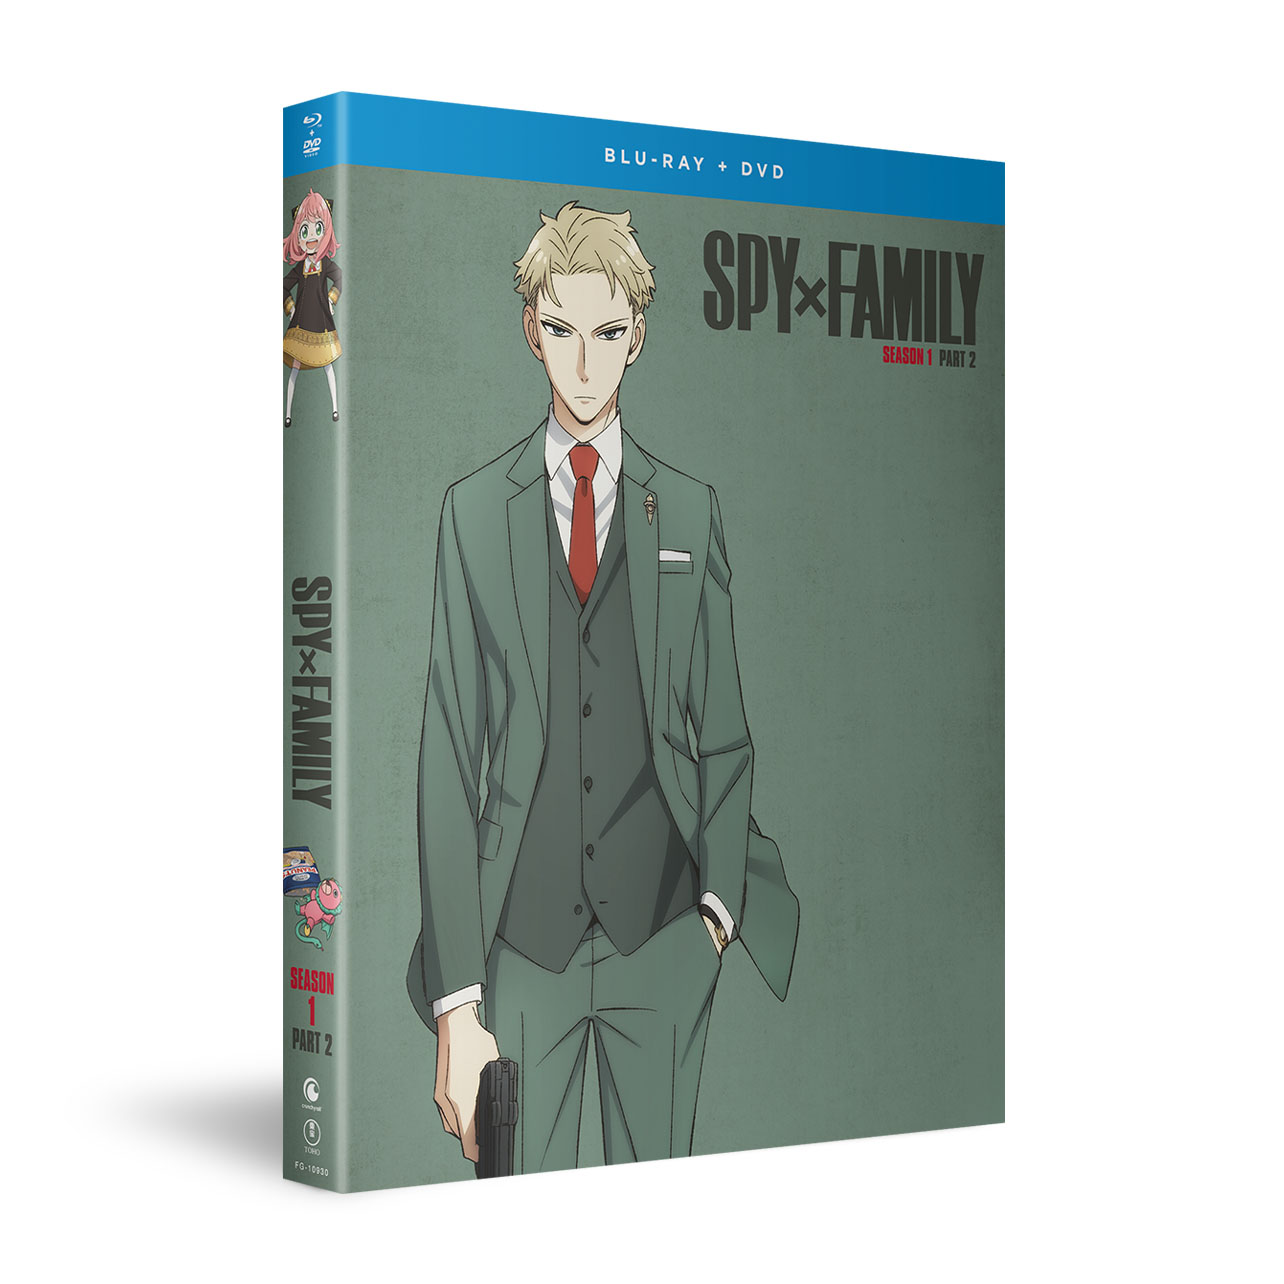 SPY x FAMILY - Part 2 - Blu-ray & DVD - Limited Edition image count 6